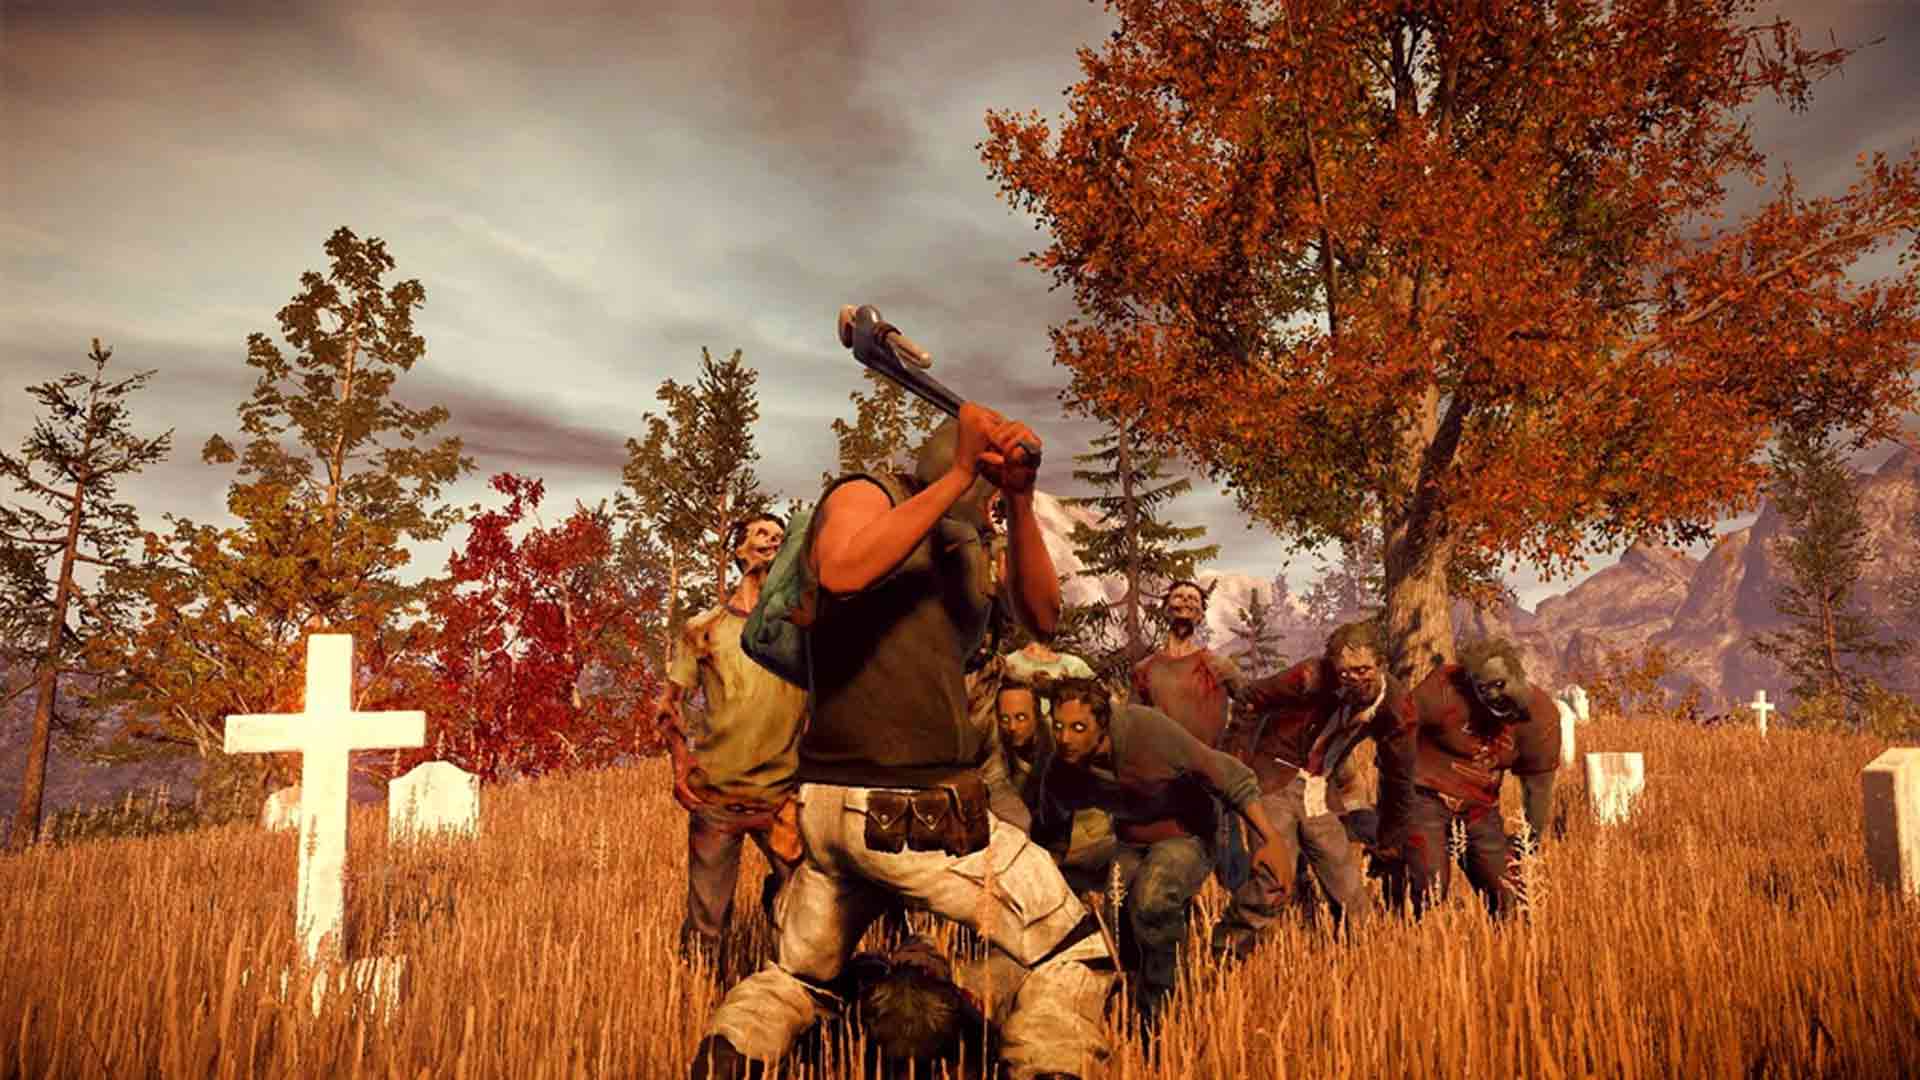  State of Decay: Year-One Survival Edition - PC : State